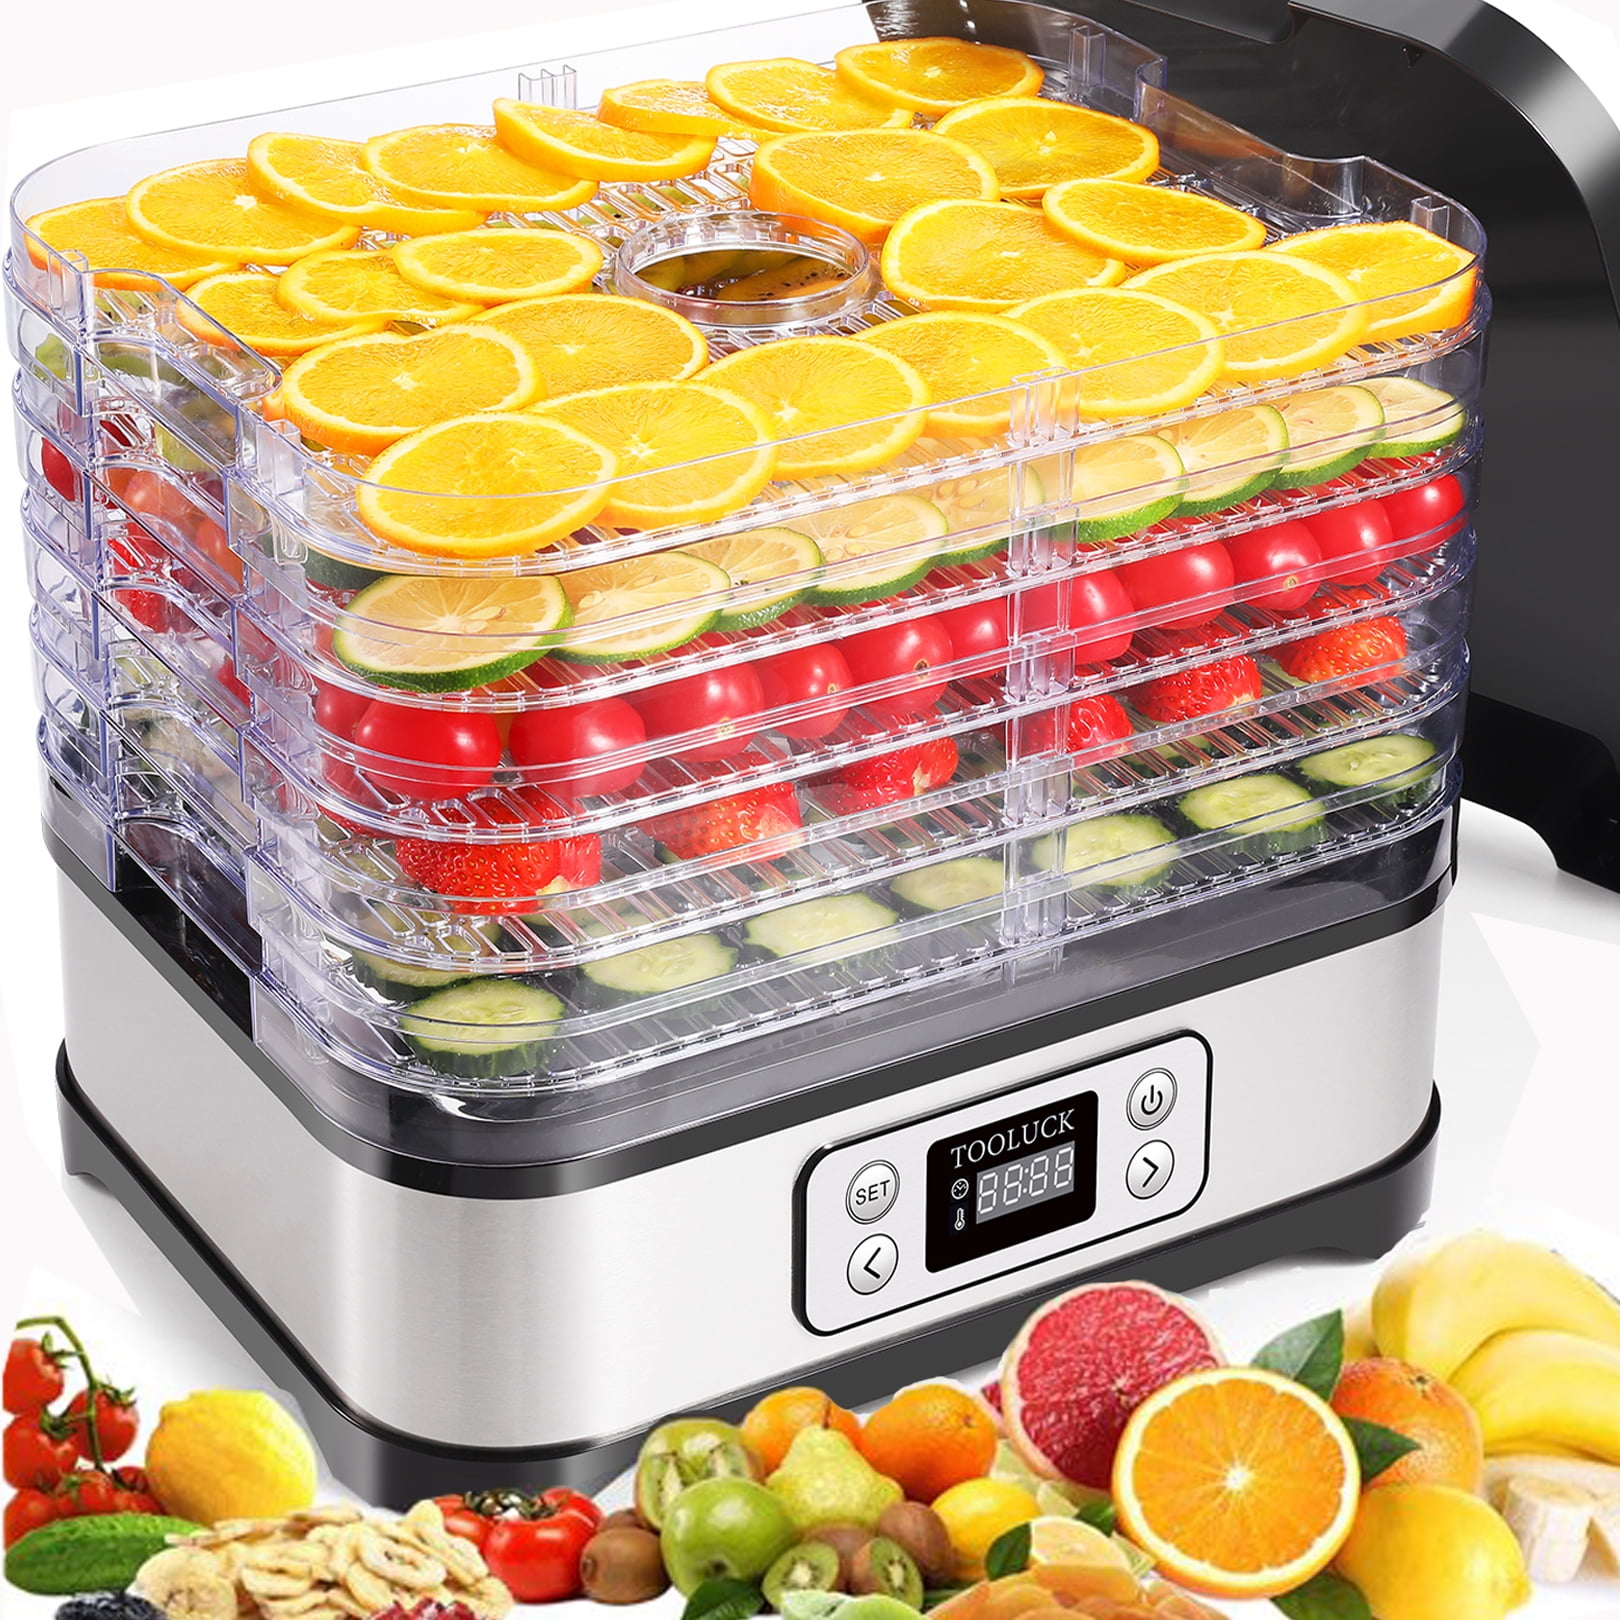 Electric Machine,250W Power,Timer and Temperature Settings, 5 Drying Trays, Stainless Steel, BPA Free - Perfect for Jerky, Herbs, Fruits, Vegetables - Walmart.com